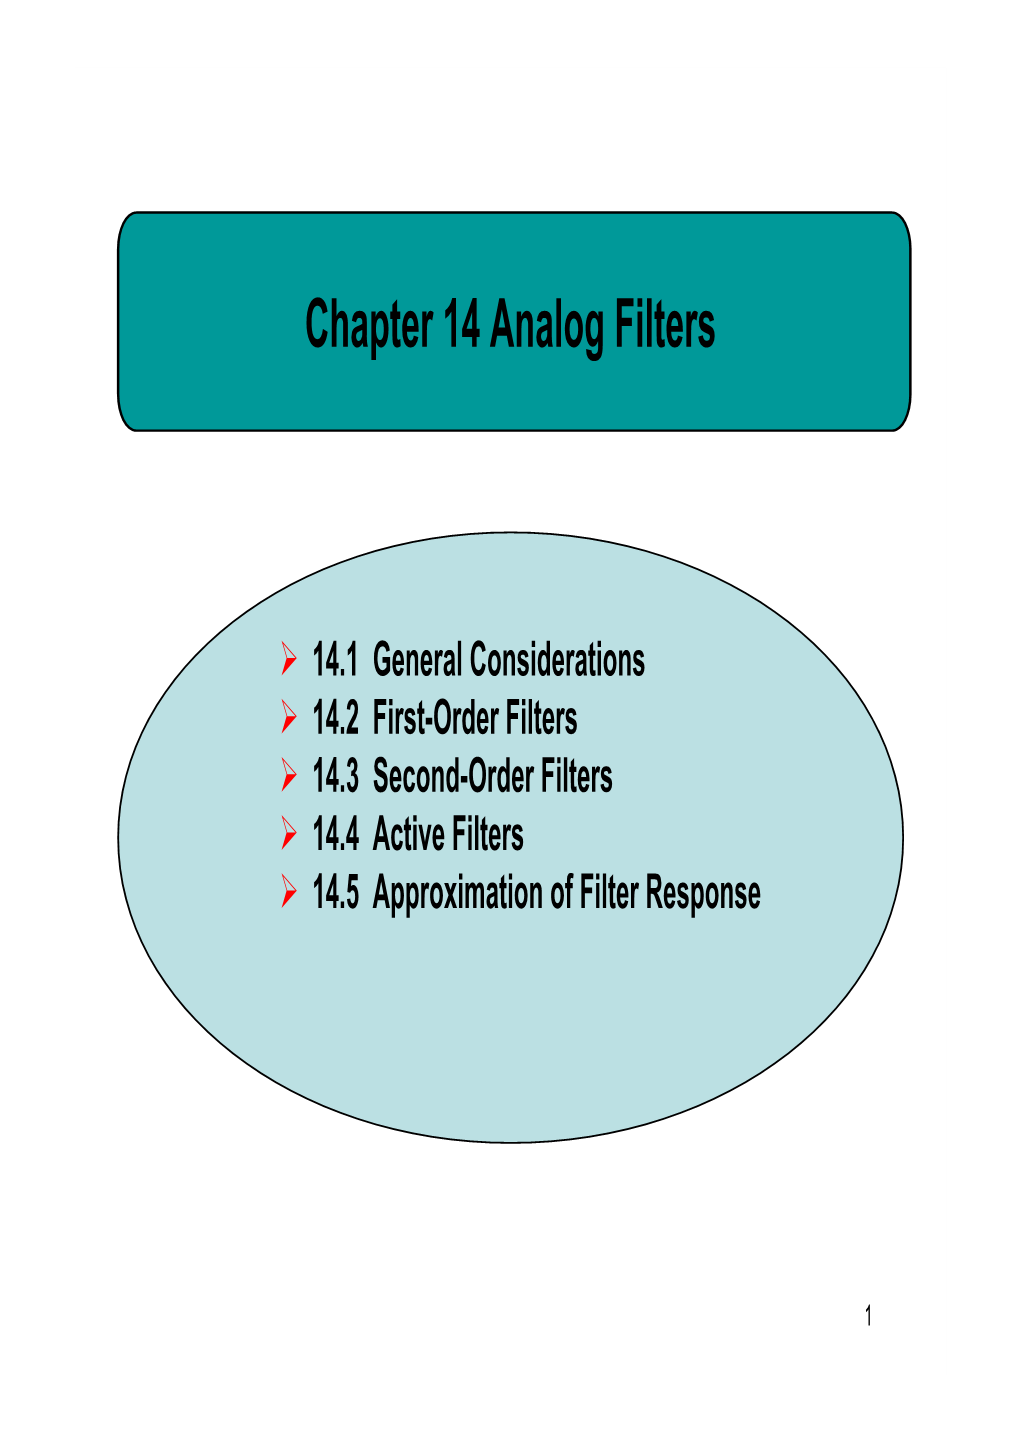 Chapter 14 Analog Filters